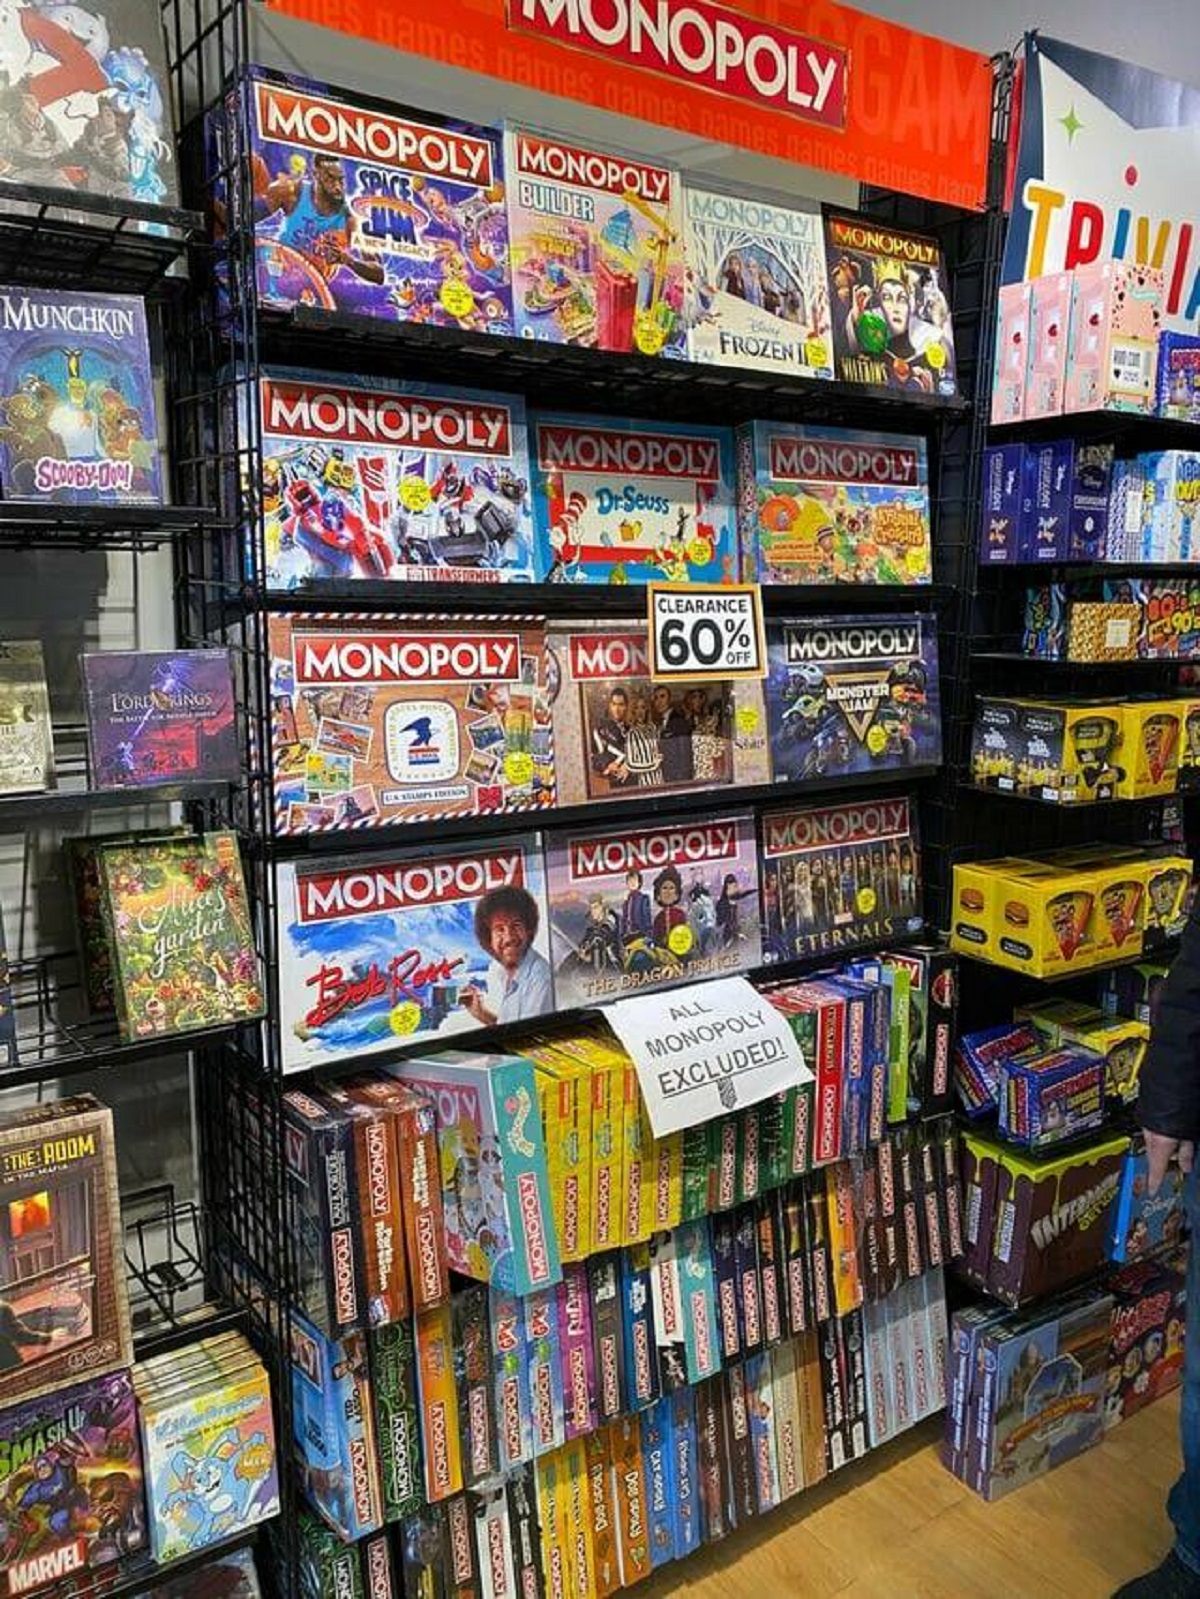 convenience store - Munchkin Start Day Prom Marvel Ed Dames Dams Monopoly Monopoly Surger Space Co J Monopoly Nopoly Gang Monopoly Mon Mil Monopoly Opso Frokers Monopoly Clearance 60% Monopou Monopo Ml Monopoly Excluded Trivi 5 72